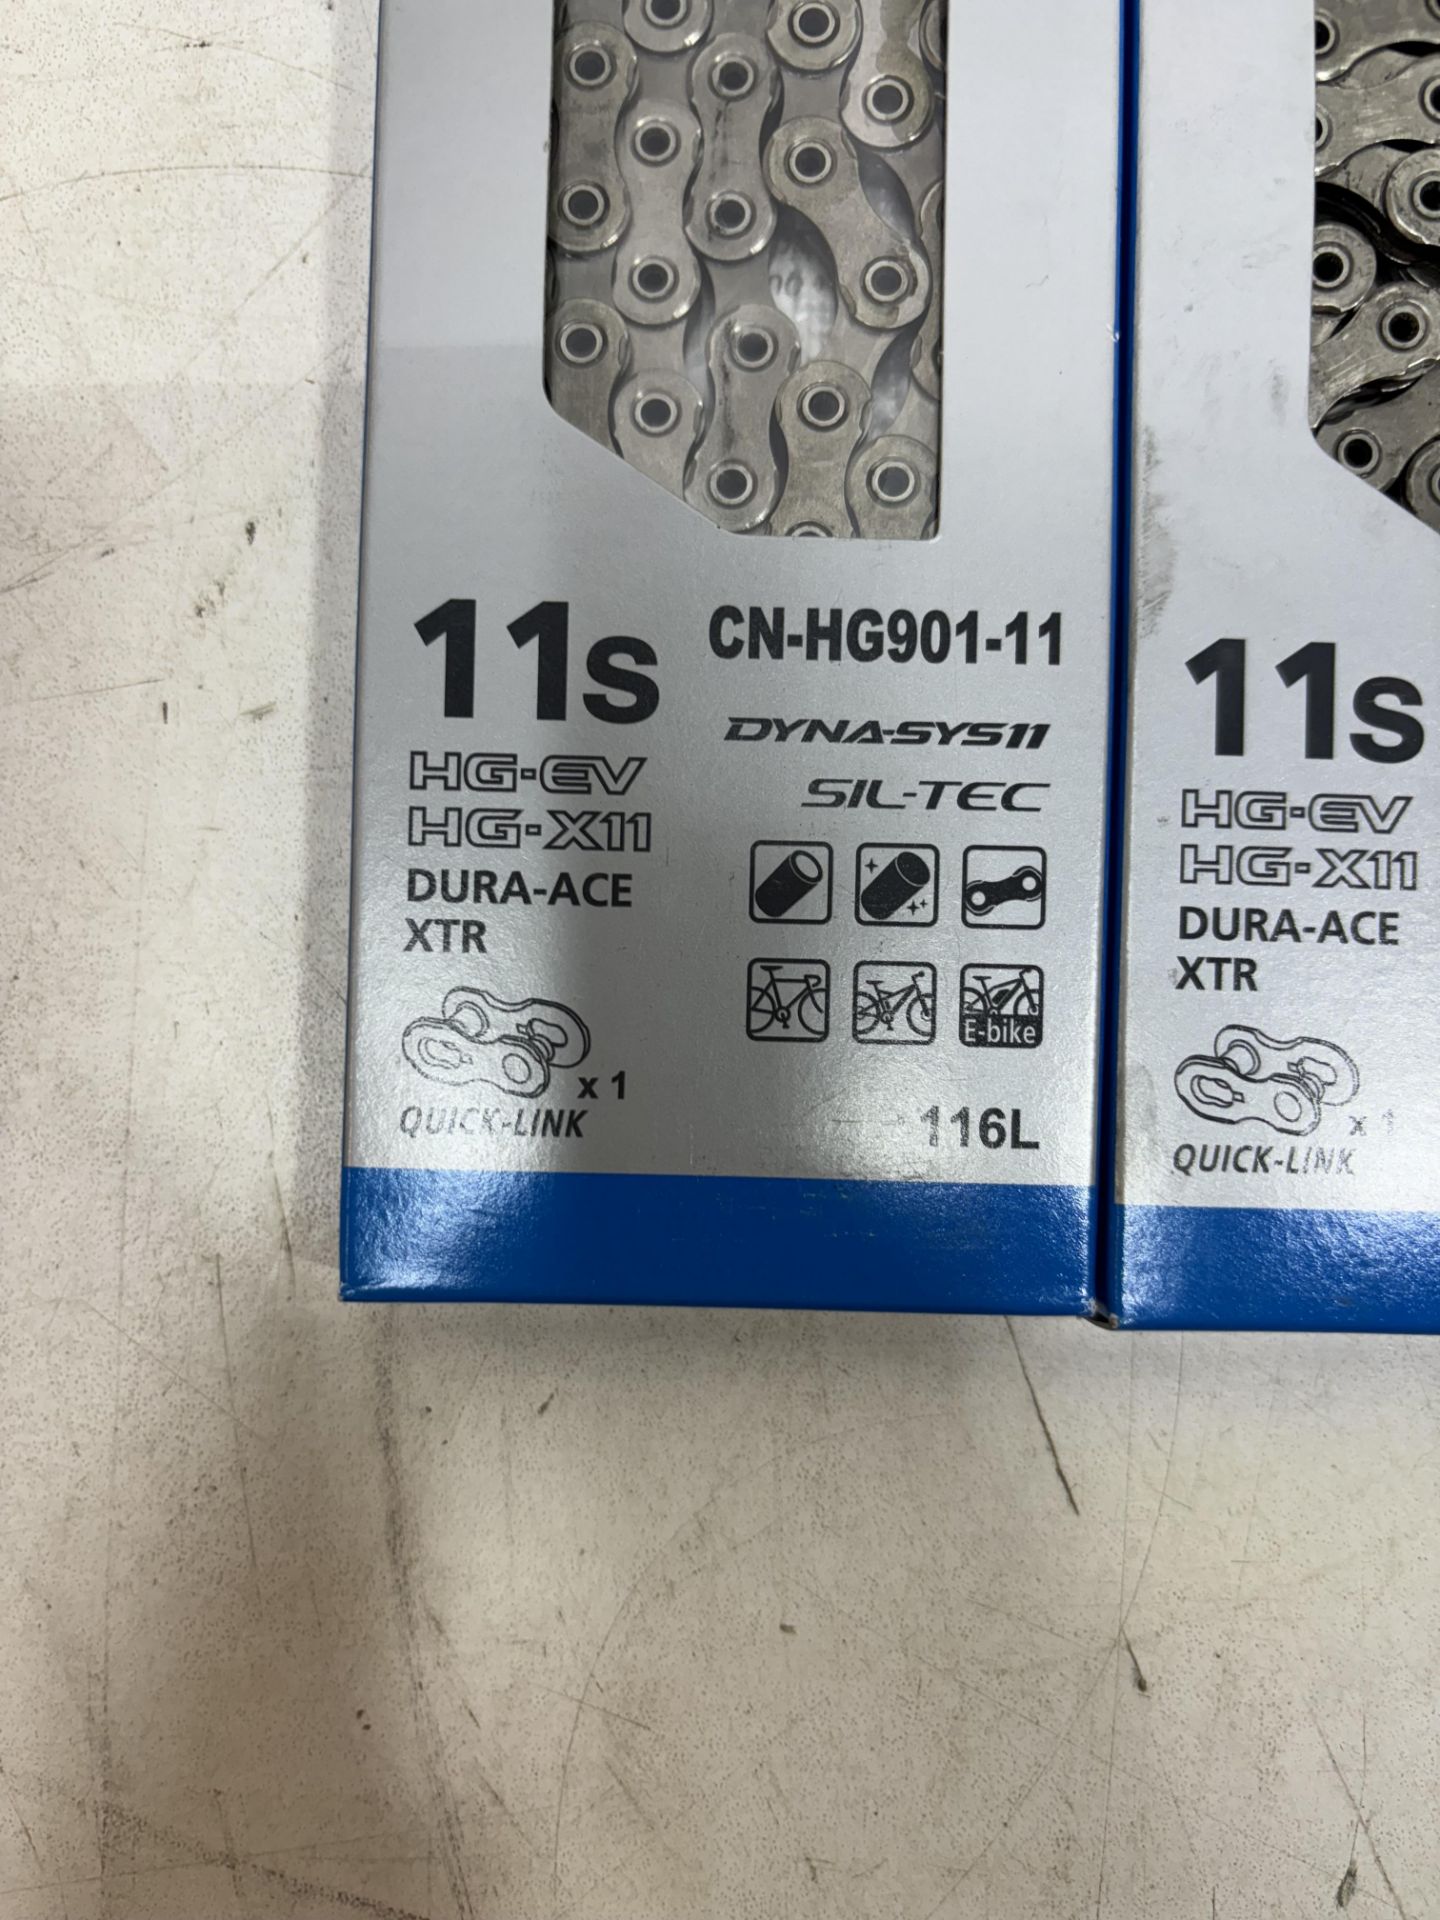 3 x Shimano CN-HG901-11 SIL-TEC 11 Speed Chains, 116 Links - Image 4 of 4